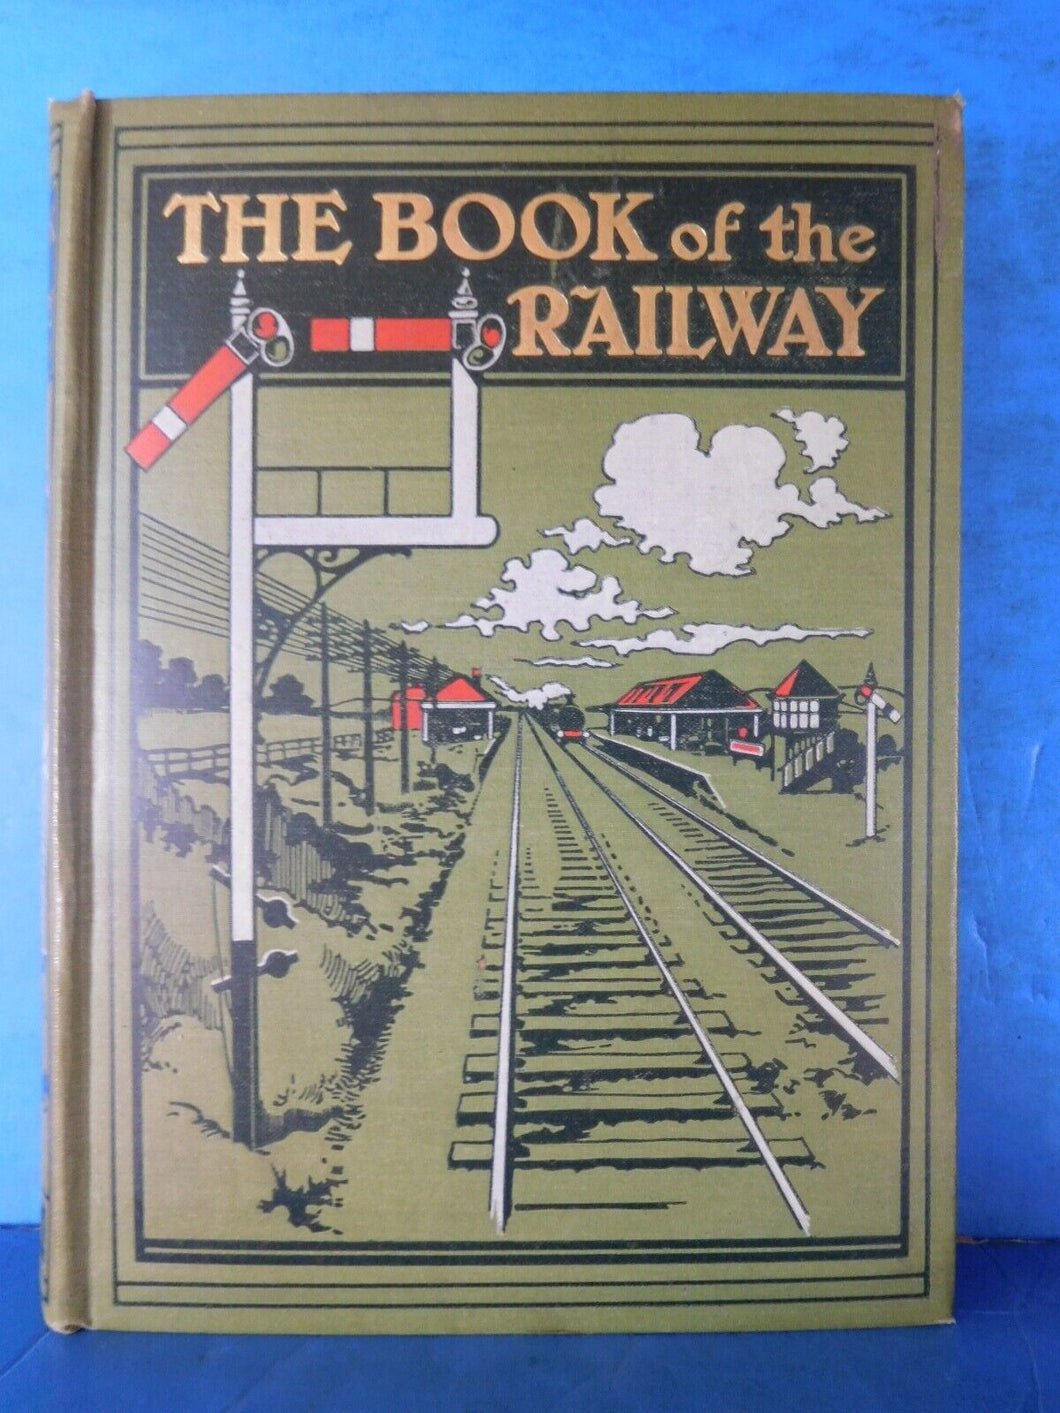 Book of The Railway by G.E. Mitton Hard Cover  1909 Fold out map